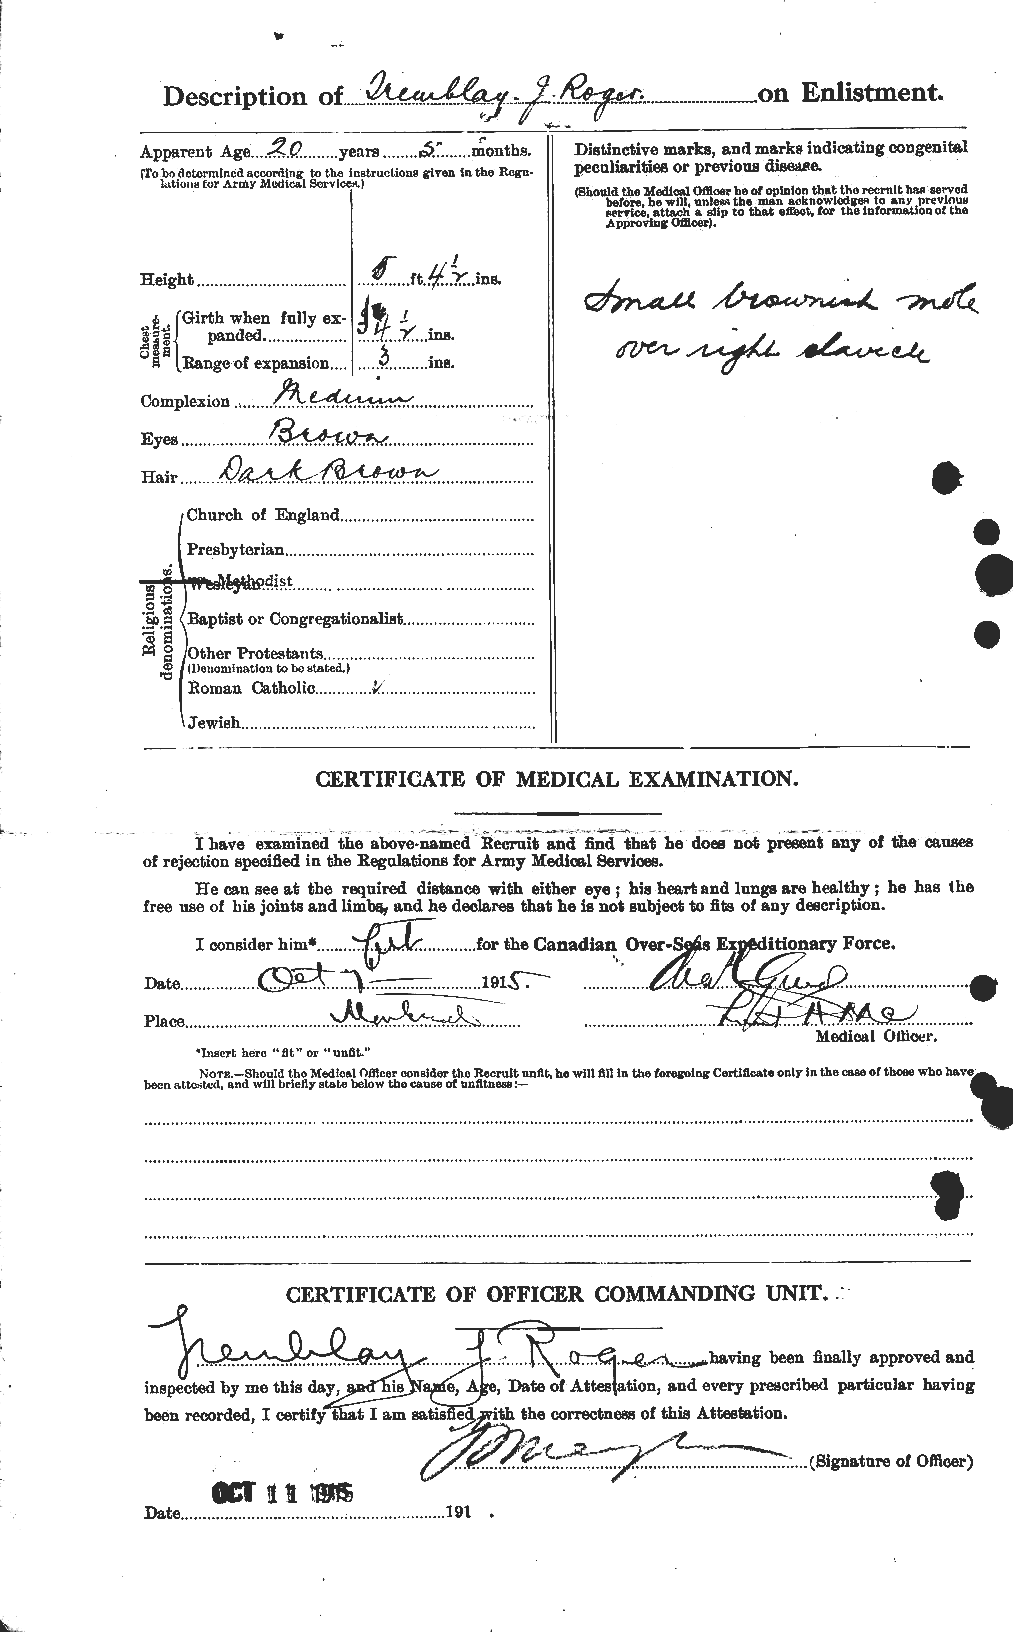 Personnel Records of the First World War - CEF 639168b